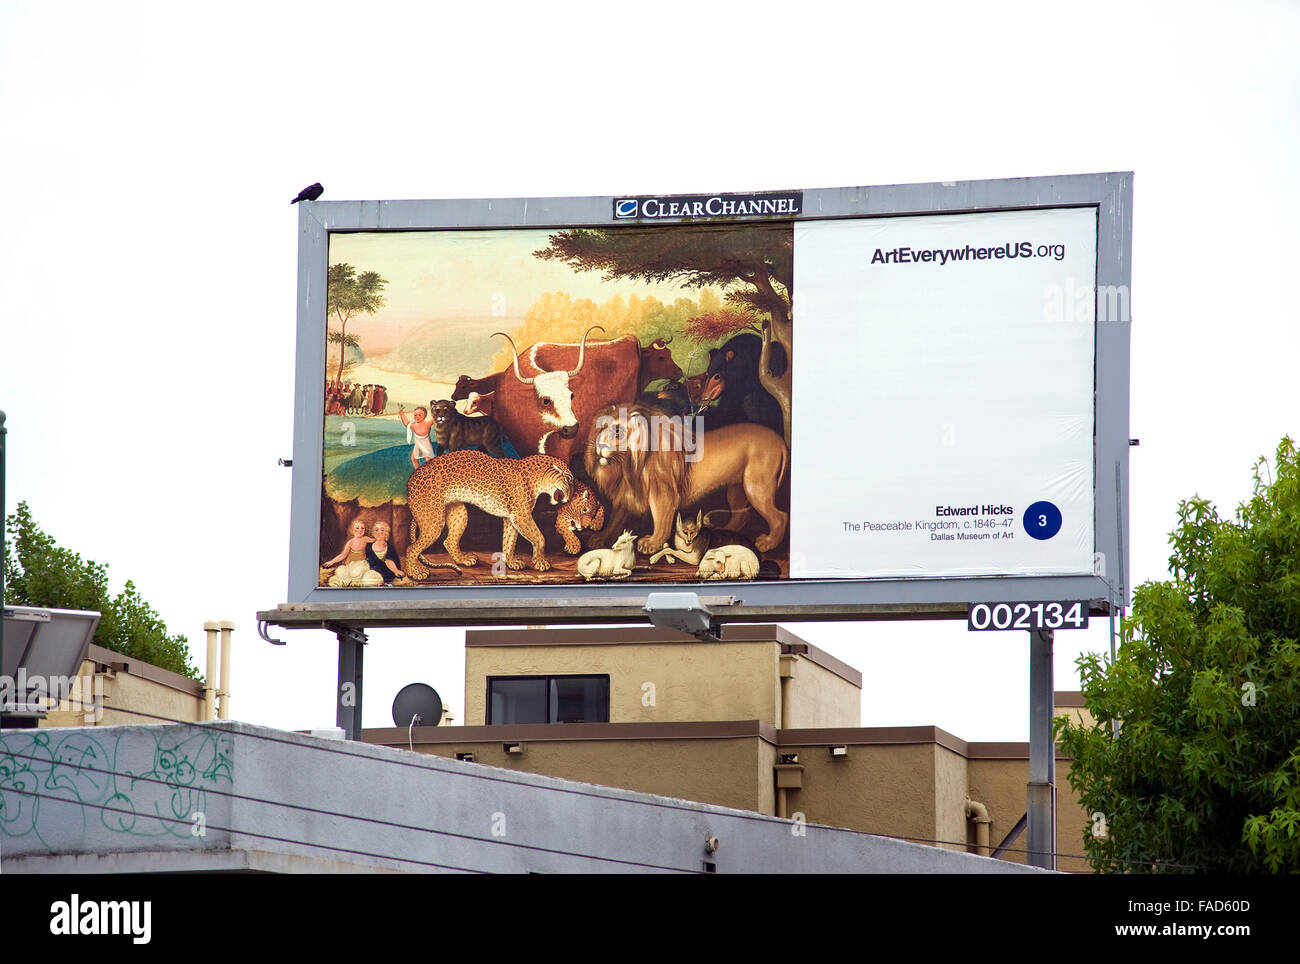 An Edward Hicks painting appears on an outdoor advertising billboard in Oakland, CA during the Art Everywhere event. Stock Photo